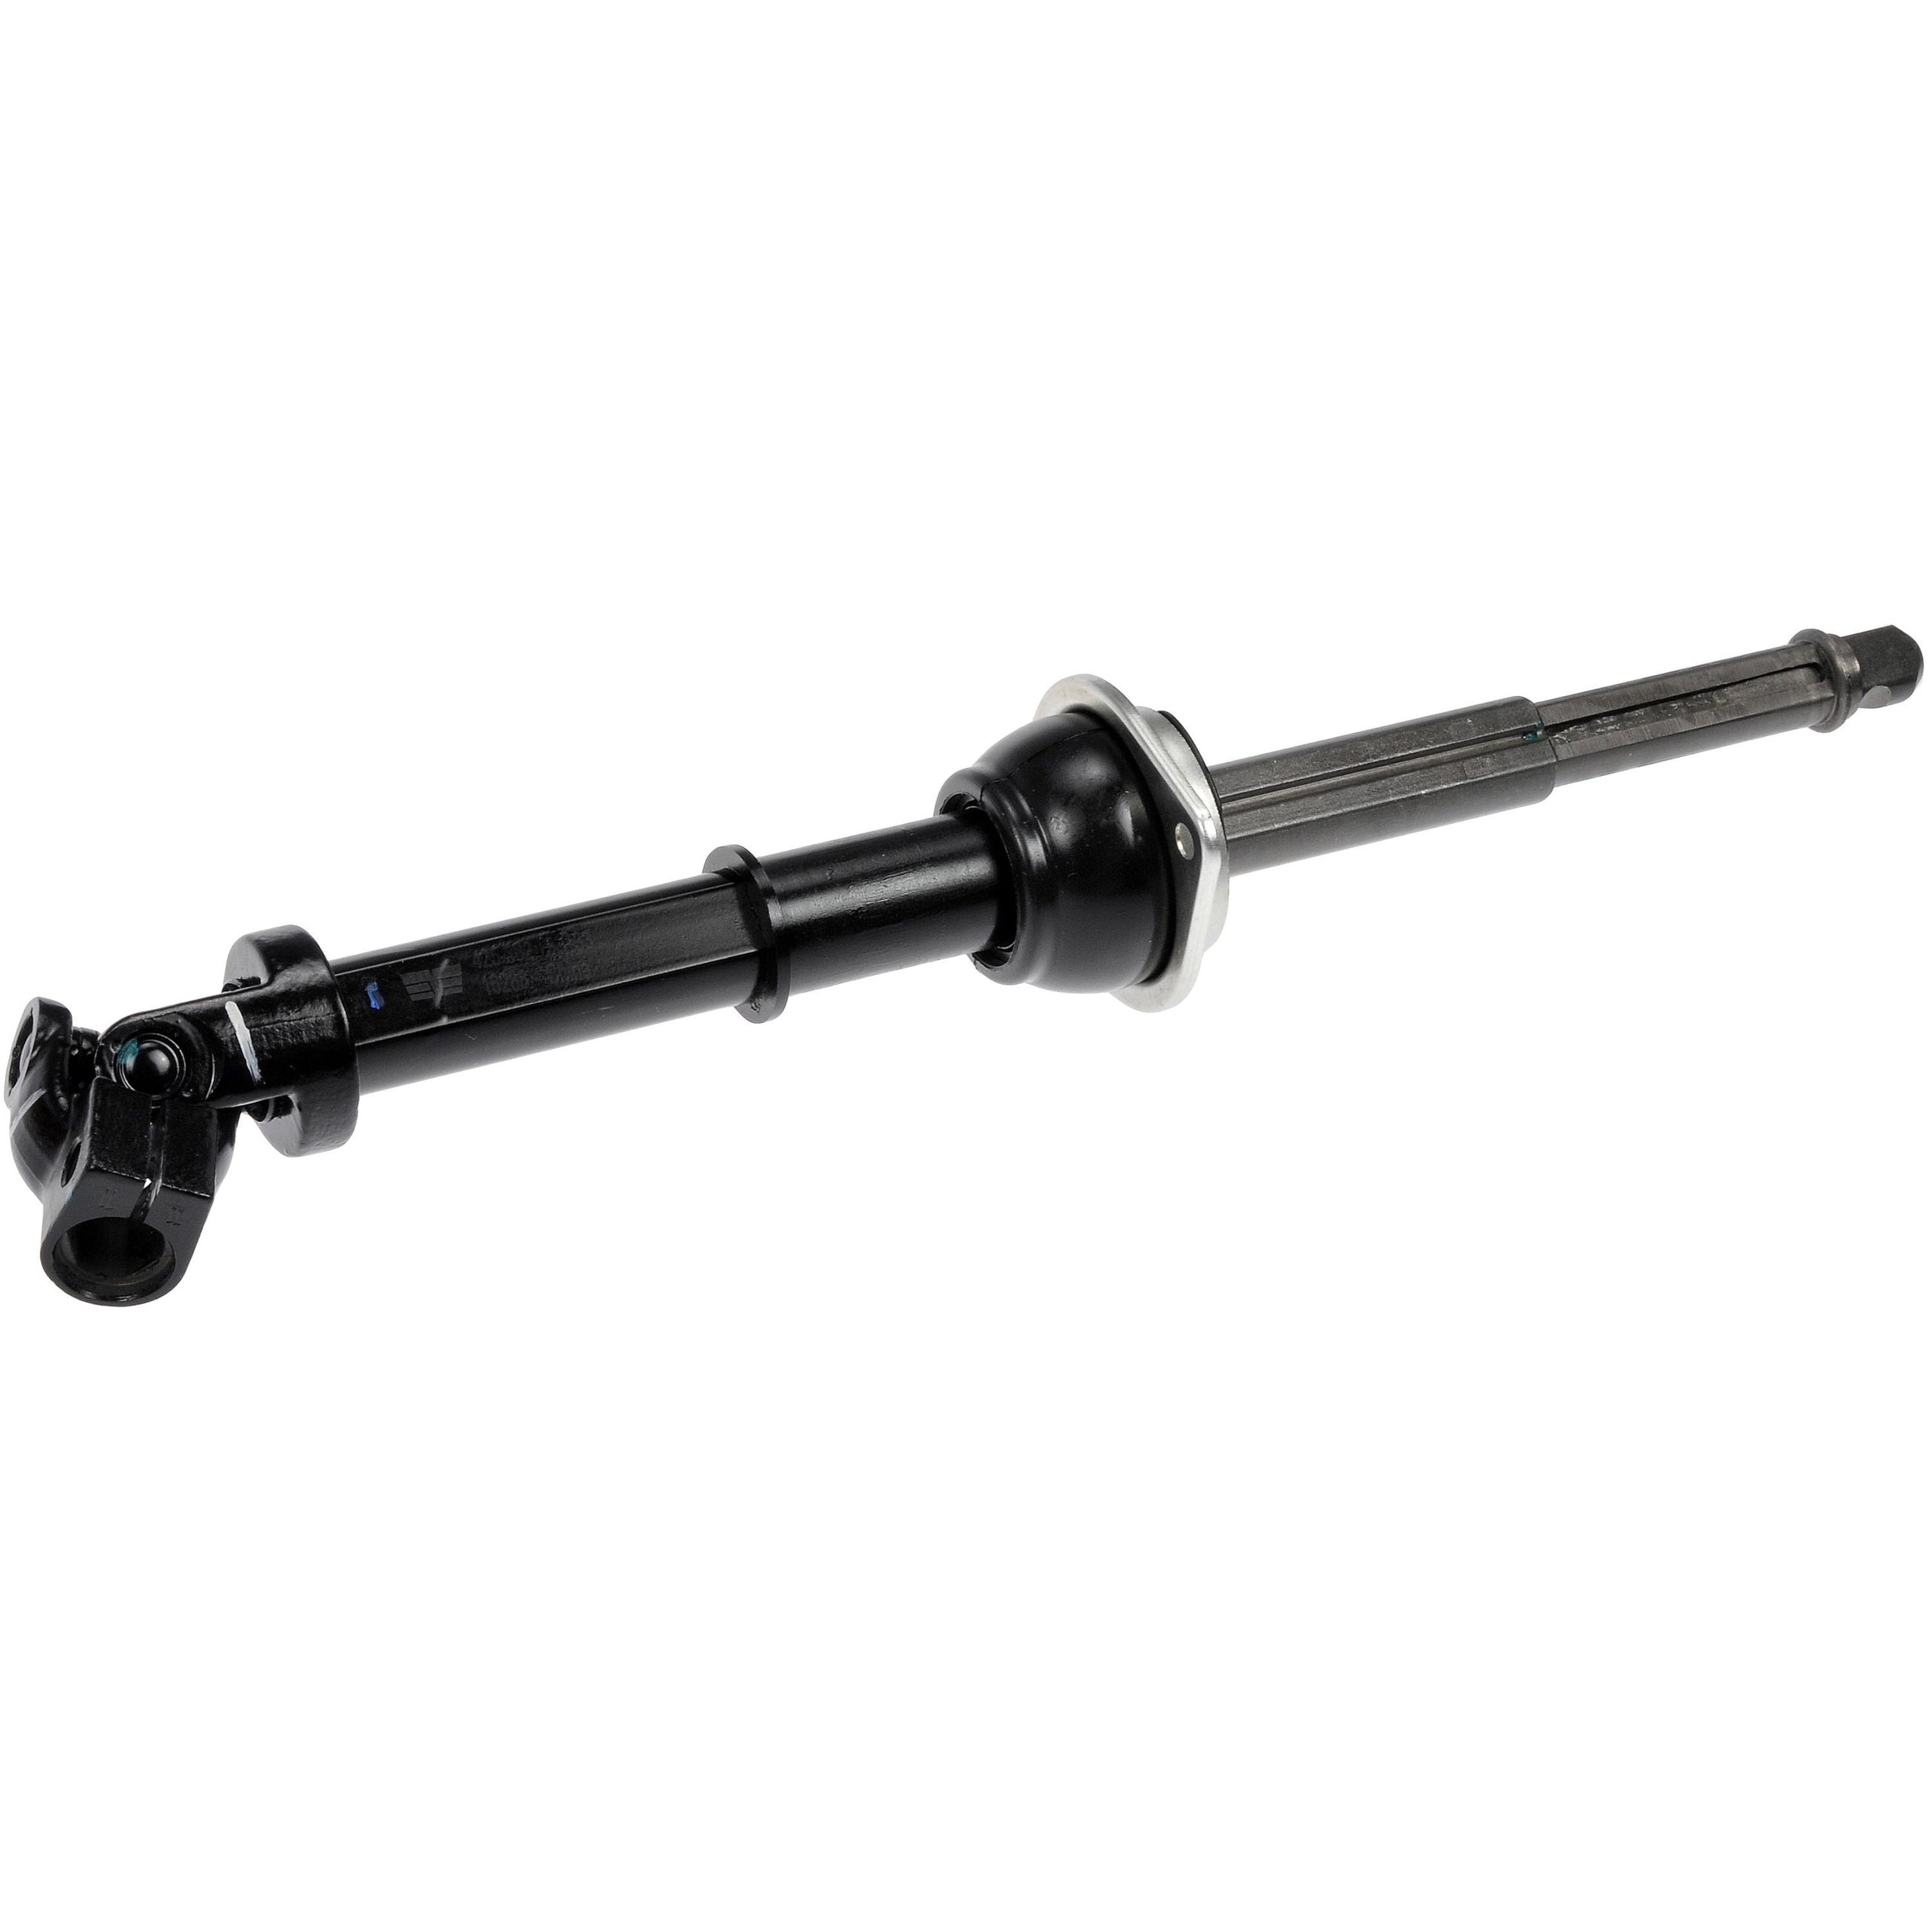 Dorman 425-350 Steering Shaft for Specific Ford Models Fits select